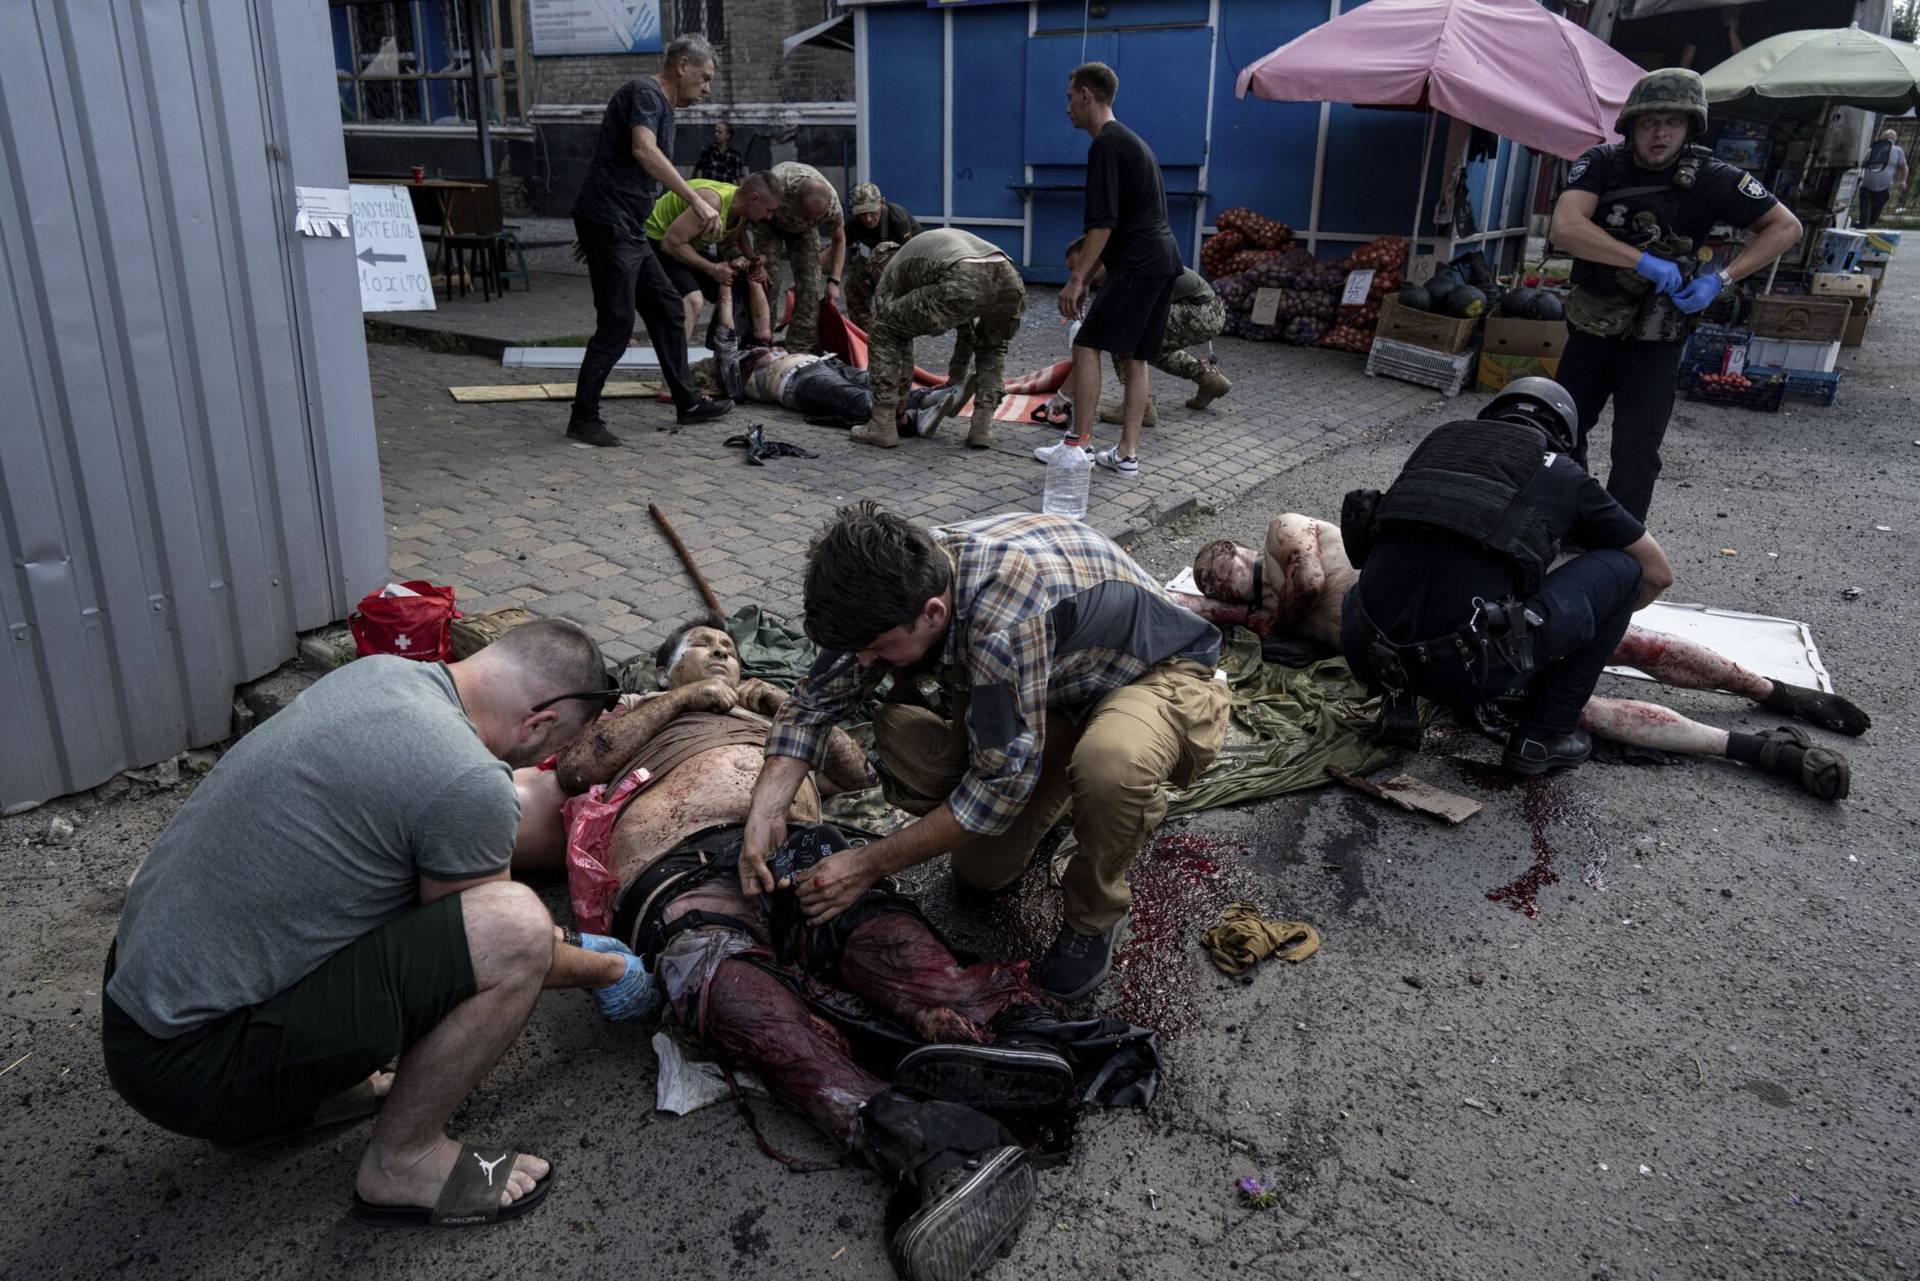 Paramedics give first aid to injured people at the food market after a Russian shelling attack in the city center of Kostiantynivka